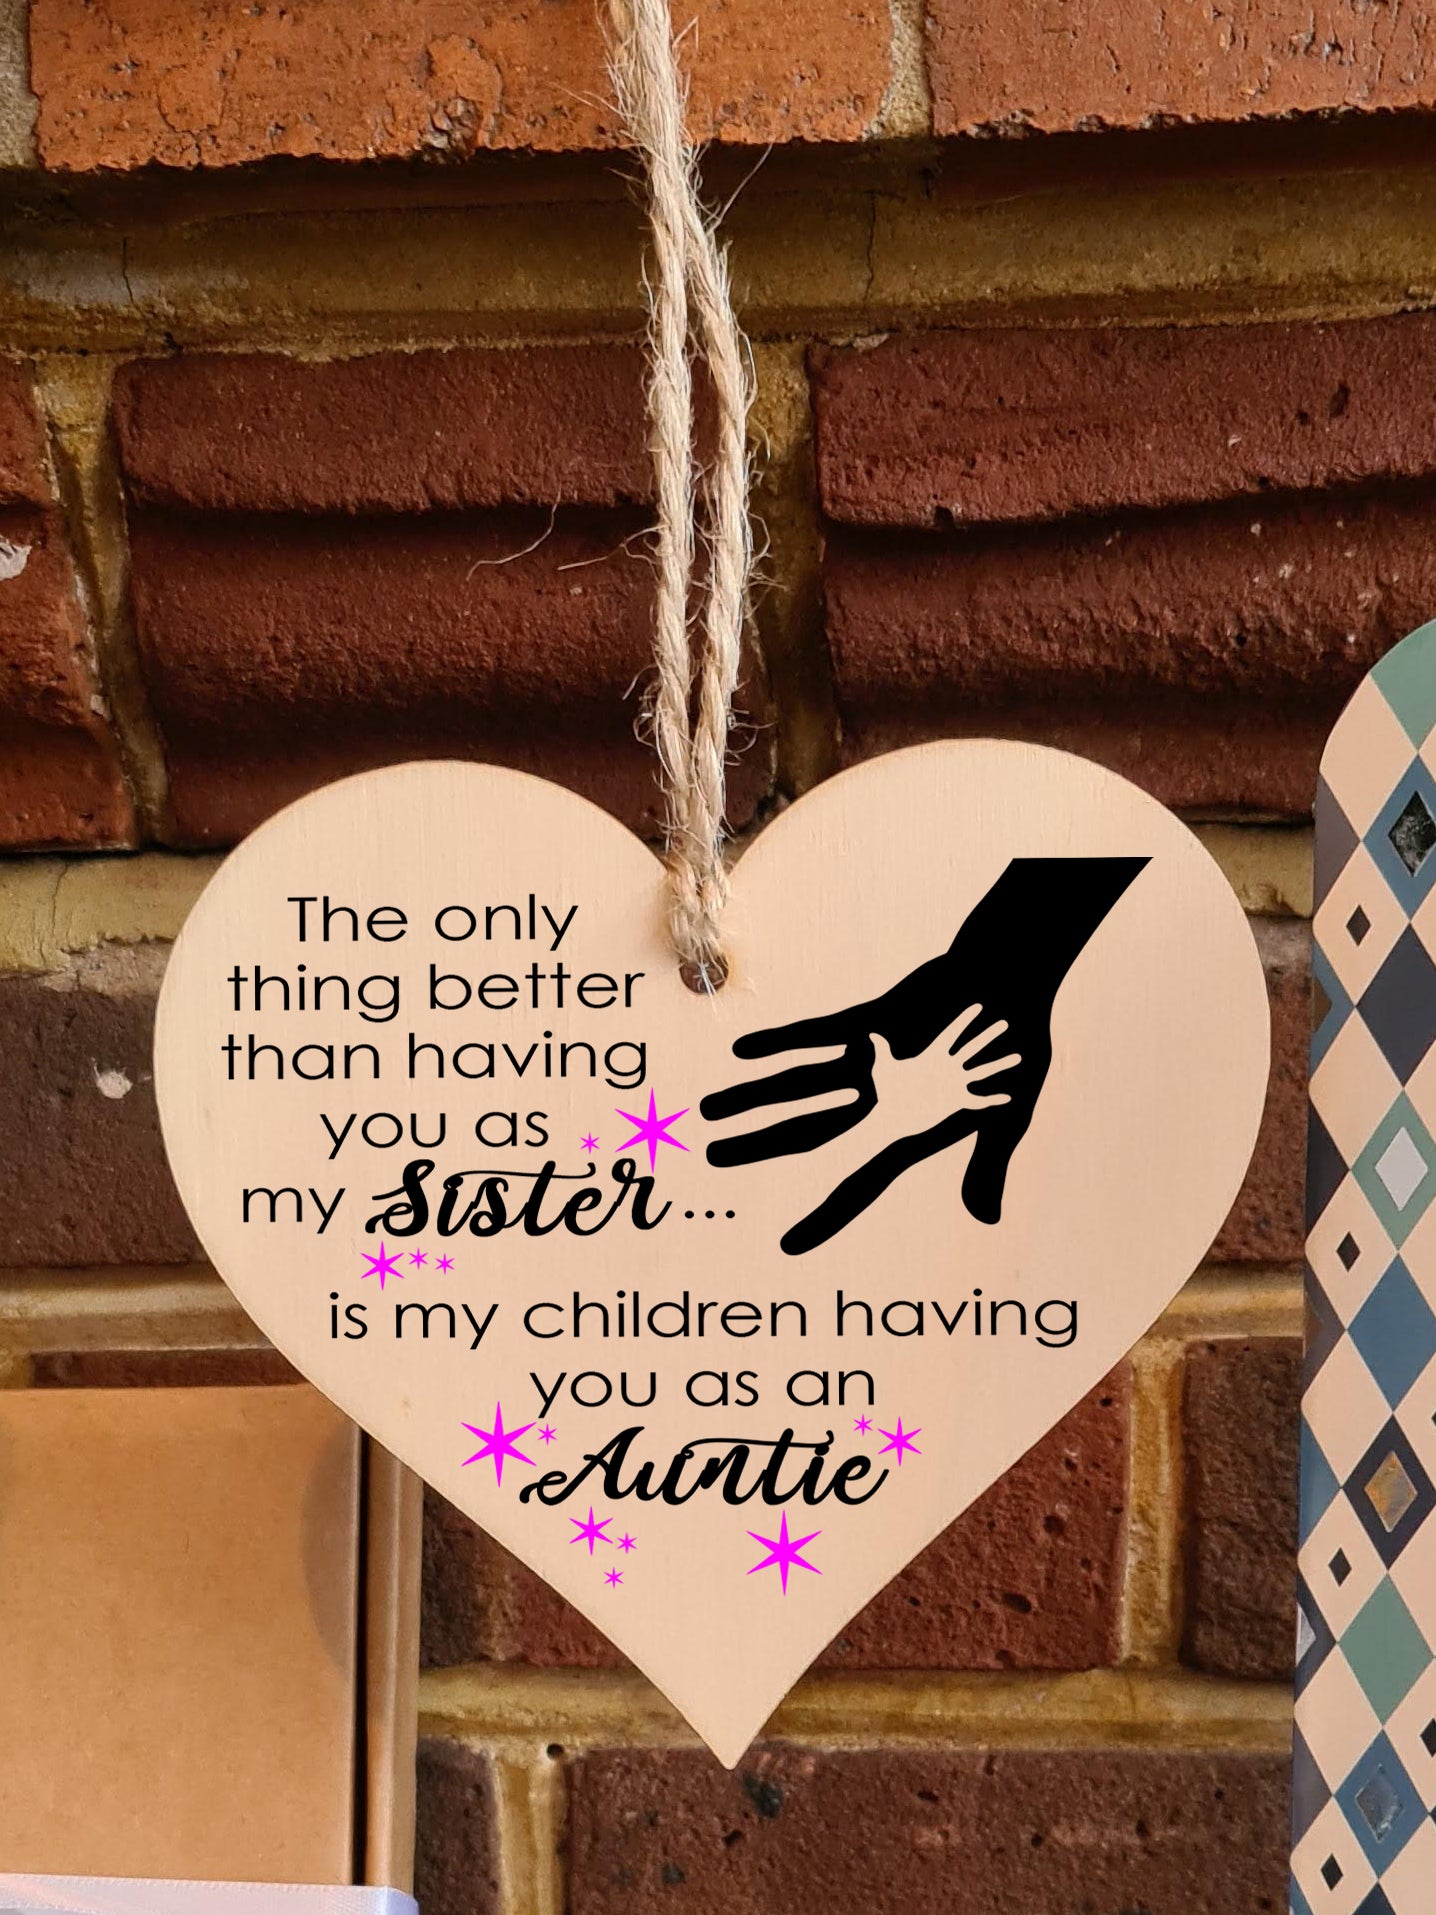 Handmade Wooden Hanging Heart Plaque Gift for Sister Auntie Loving Thoughtful Thank You Keepsake